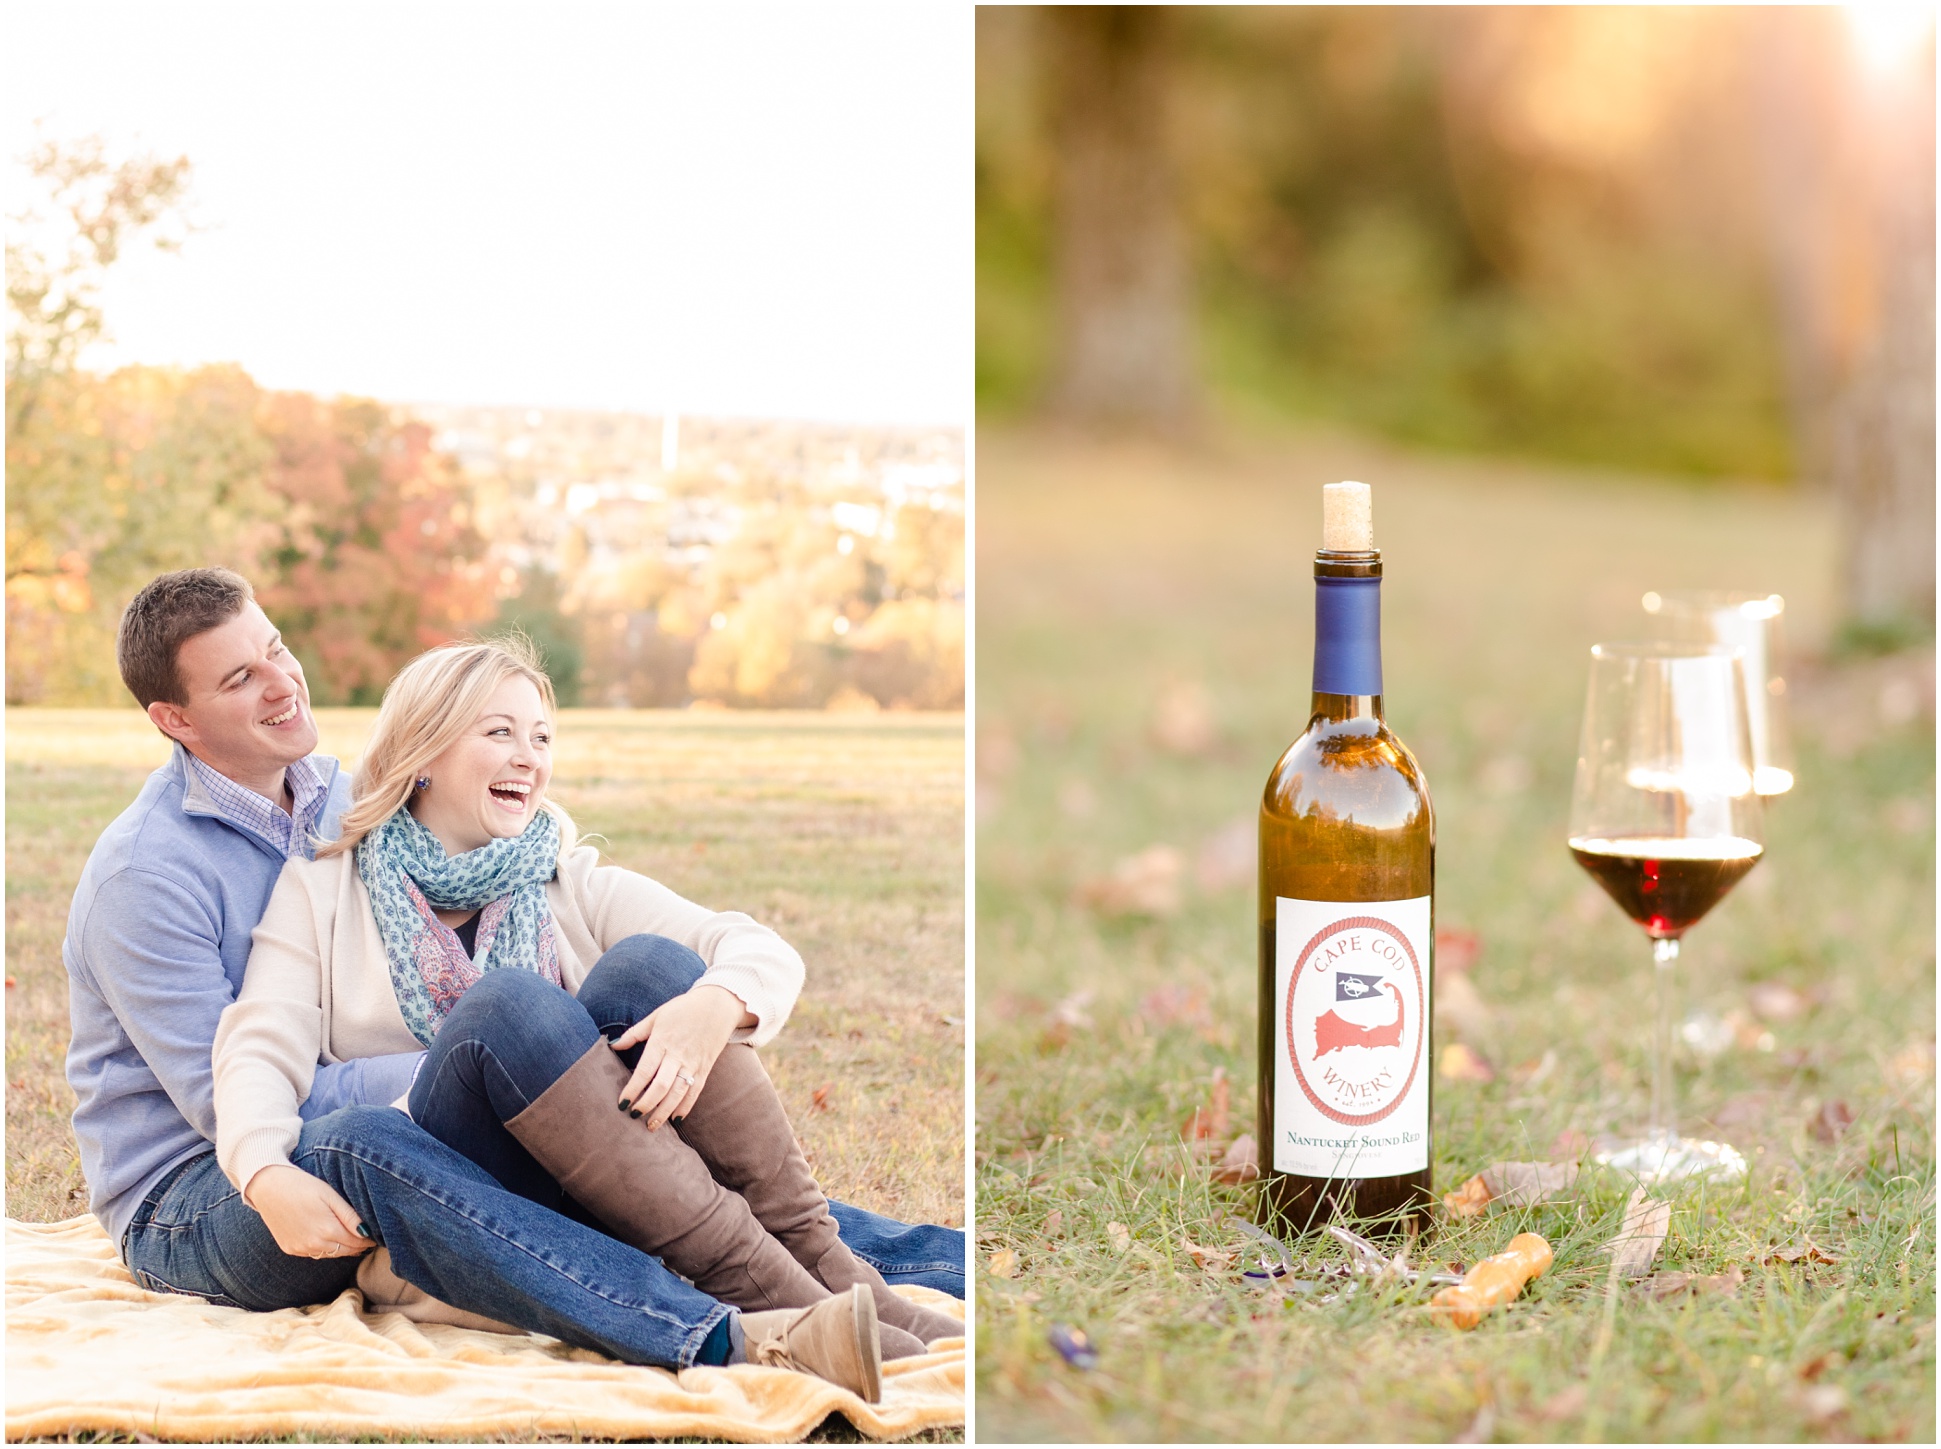 Couple sitting on blanket laughing; Wine bottle and wine glasses